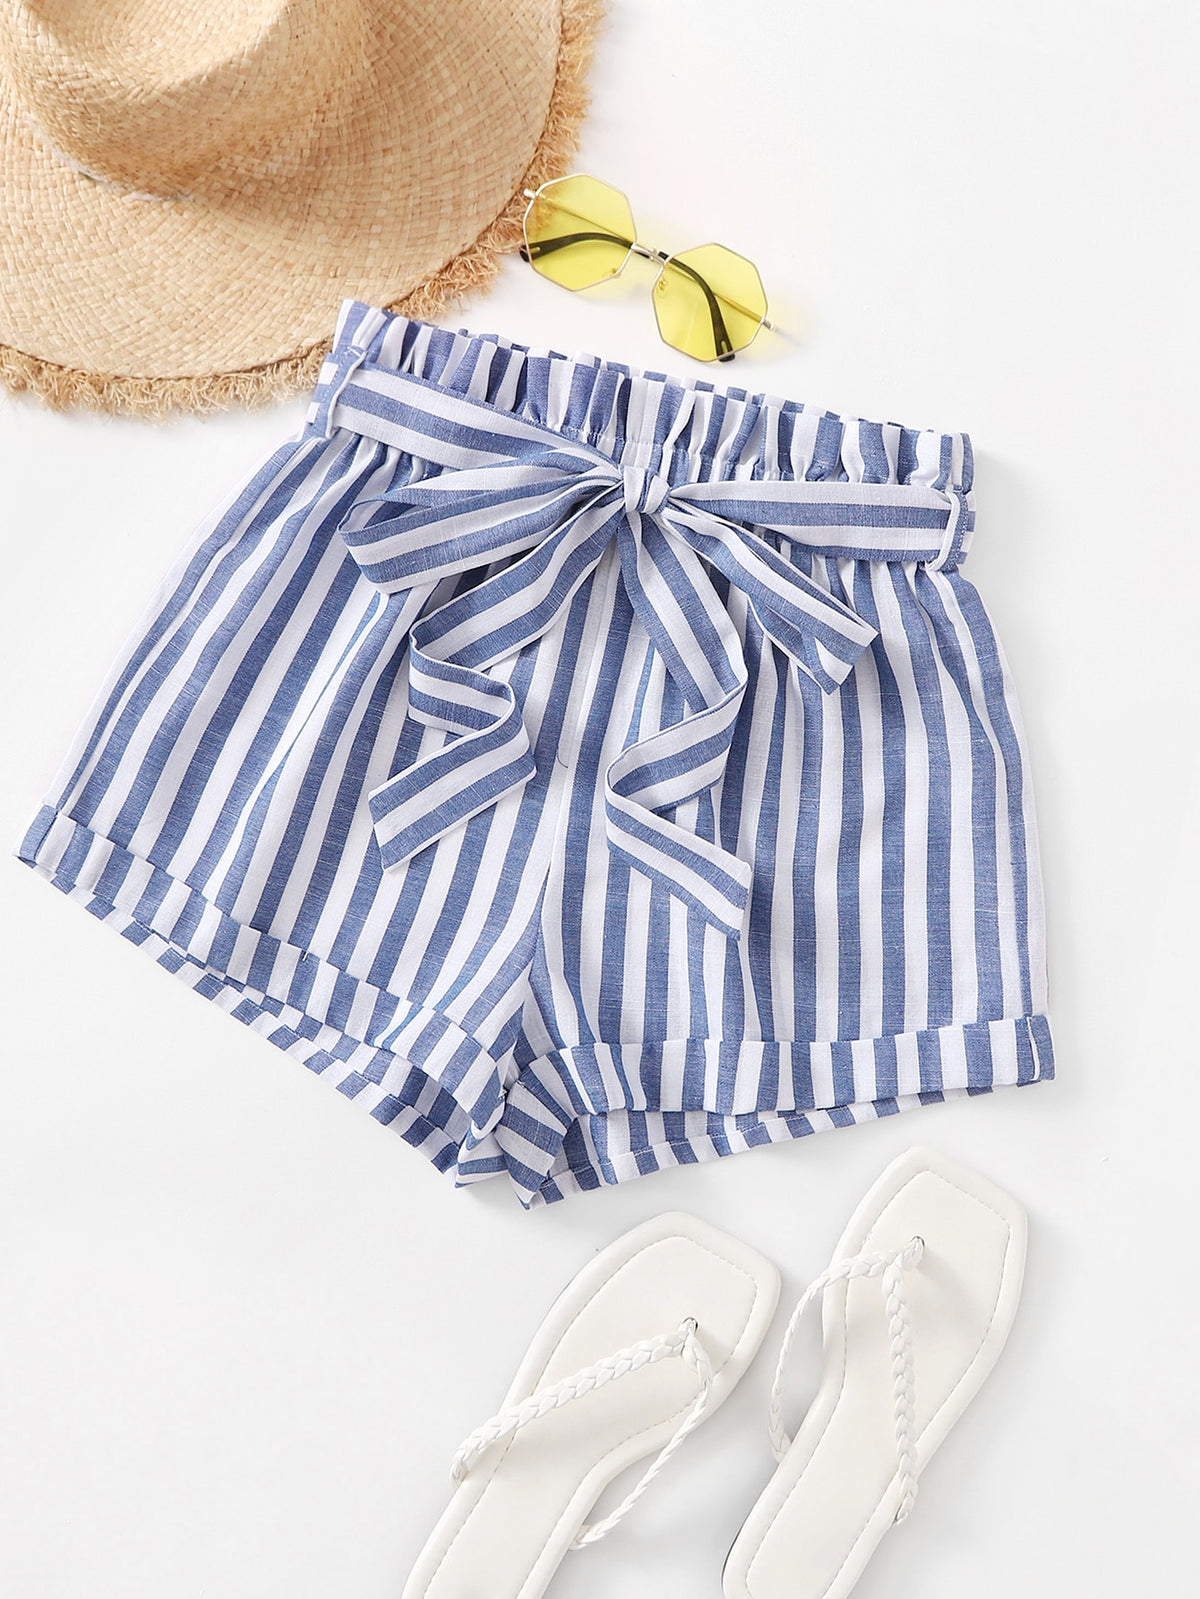 Striped Shorts with Rolled Hem - XL